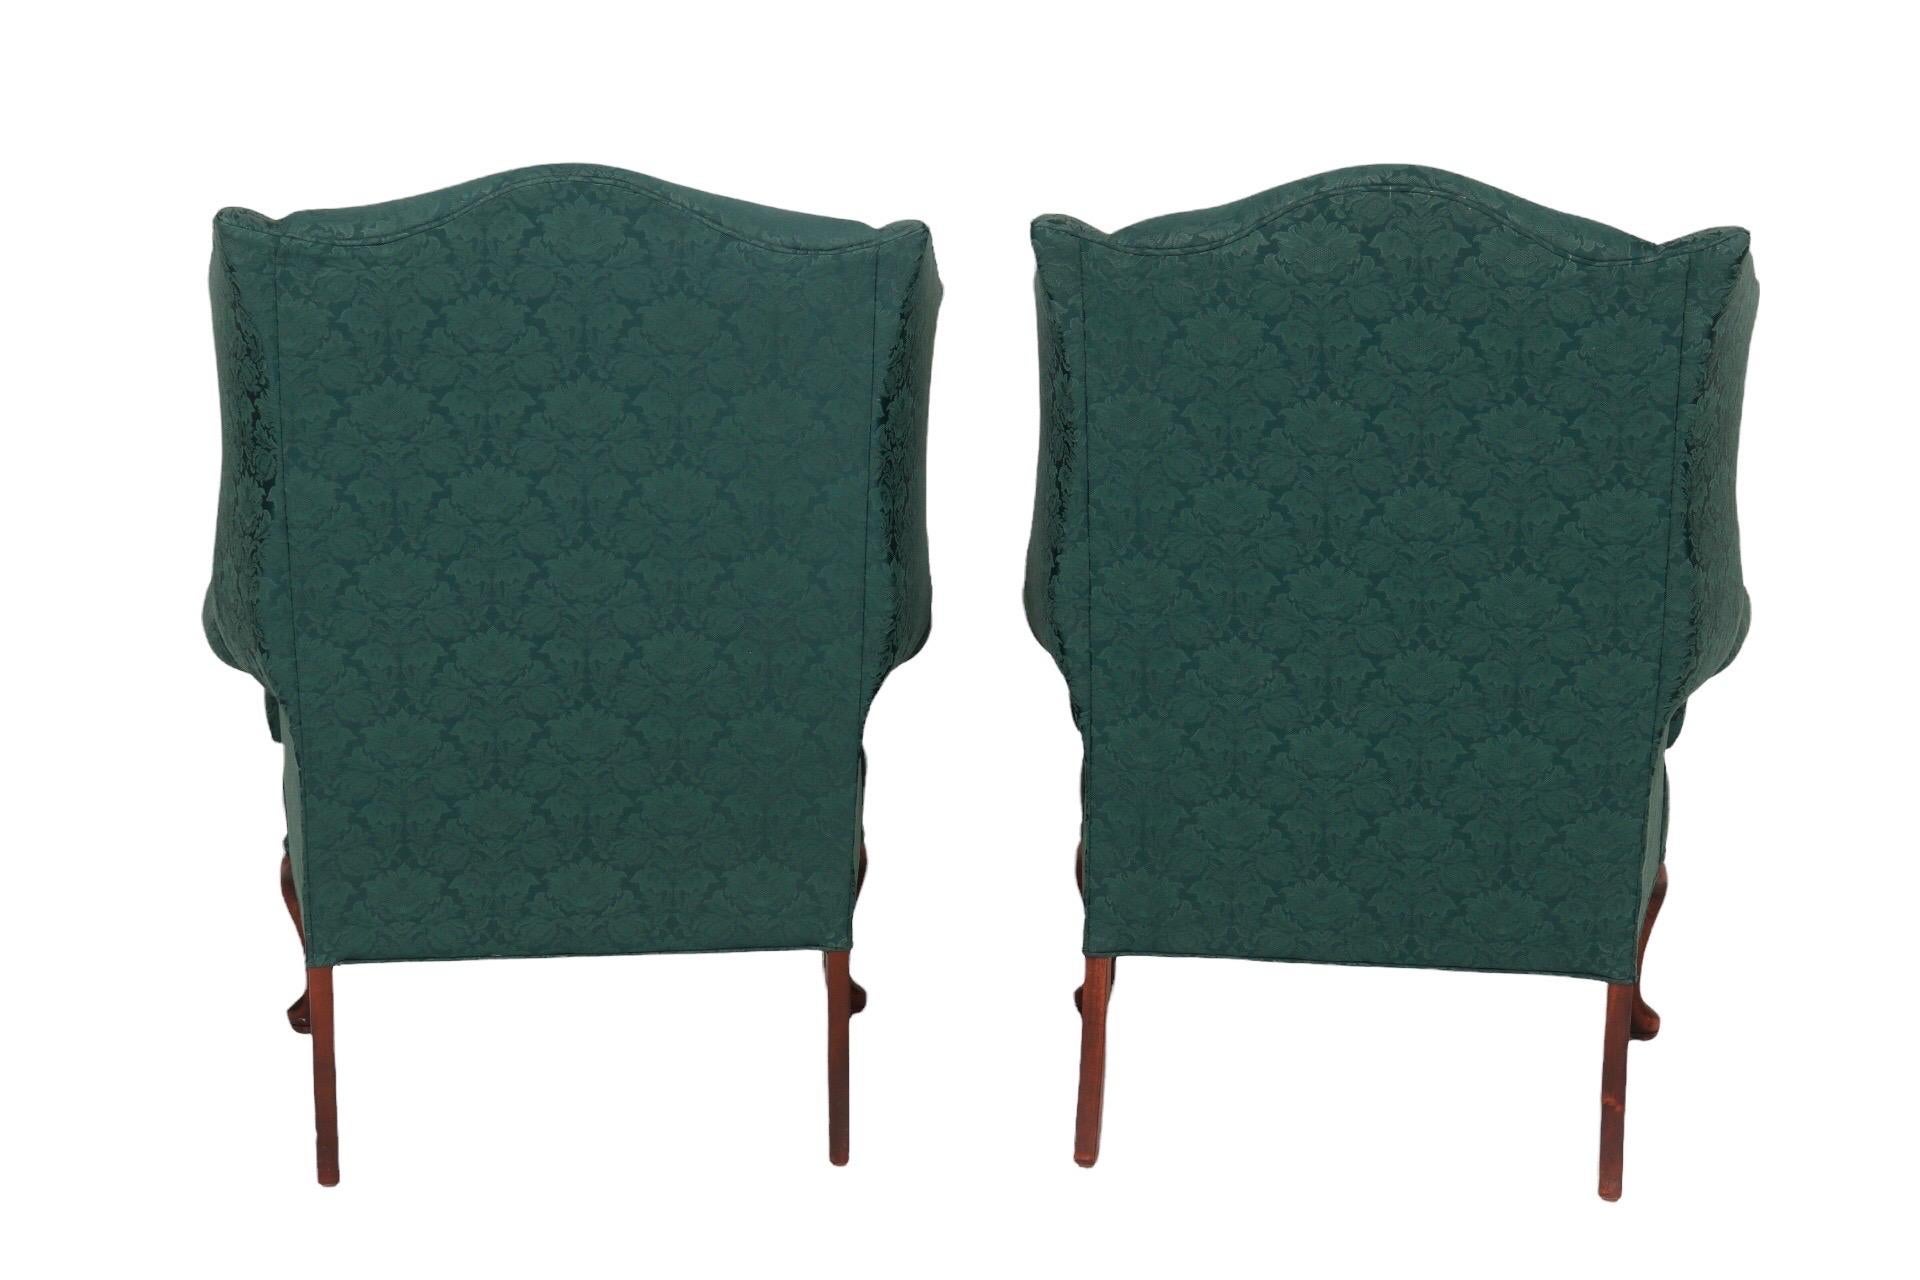 20th Century Forest Green Wingback Chairs, a Pair